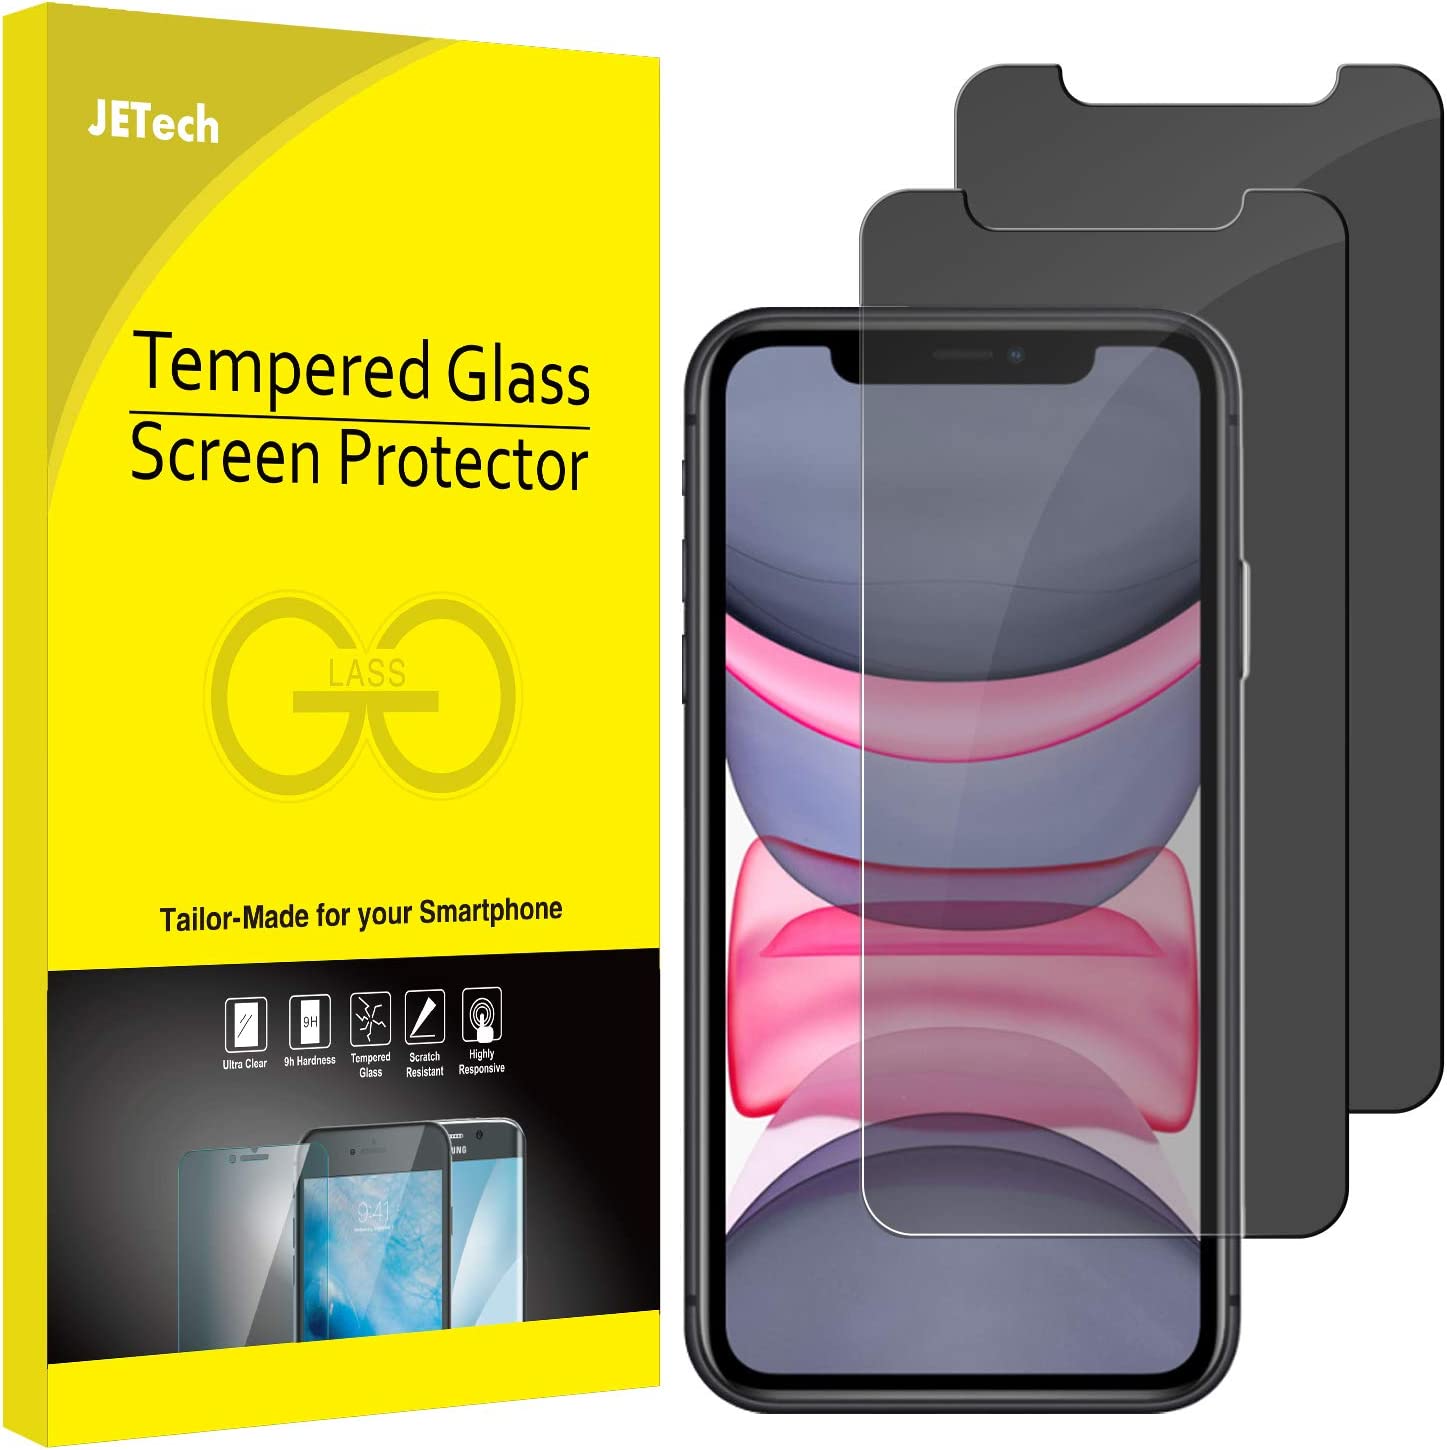 Jetech tempered glass screen protector for iPhone 11, best privacy screen protector